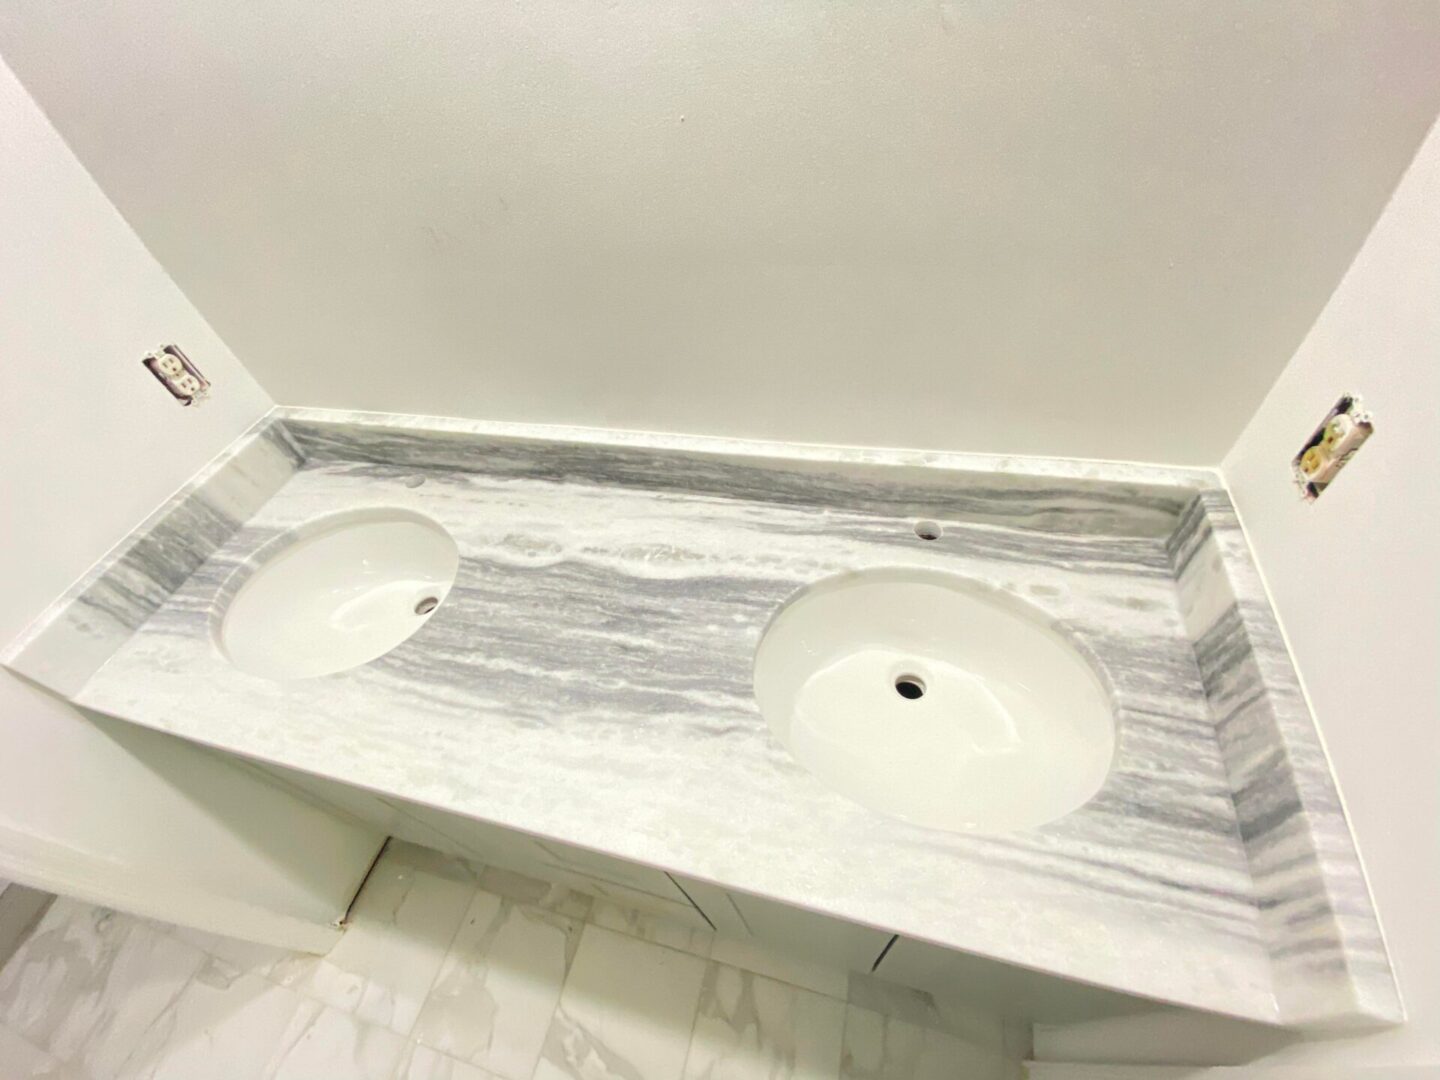 A modern sink under construction with white marbles